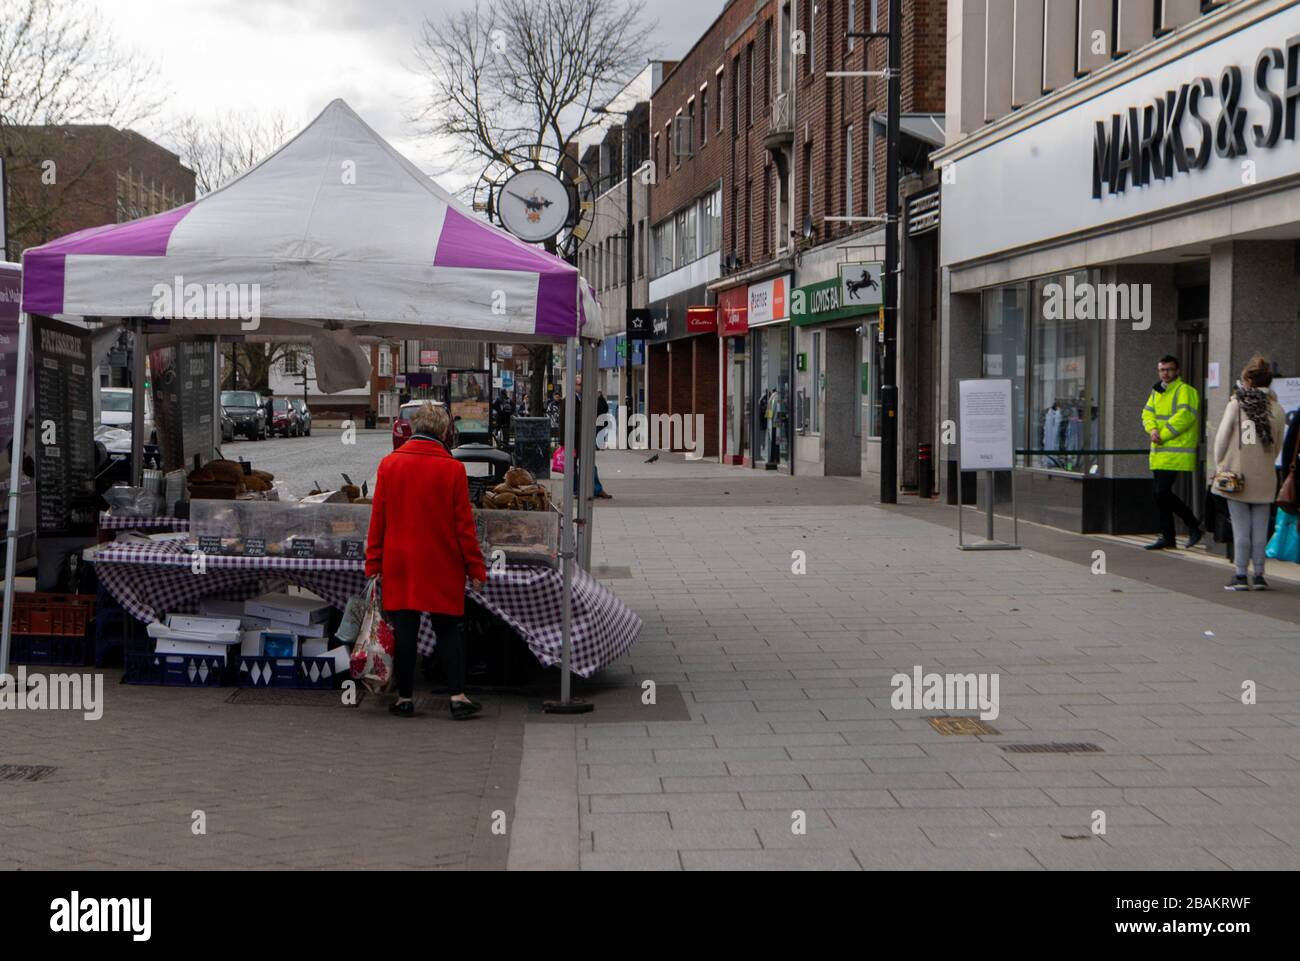 Brentwood Essex, UK. 28th Mar, 2020. A deserted Saturday afternoon High Street in Brentwood Essex as covid-19 social distancing regulations bite A solitiary market stall with a solitiary customer beside a line at Marks and Spenser Credit: Ian Davidson/Alamy Live News Stock Photo